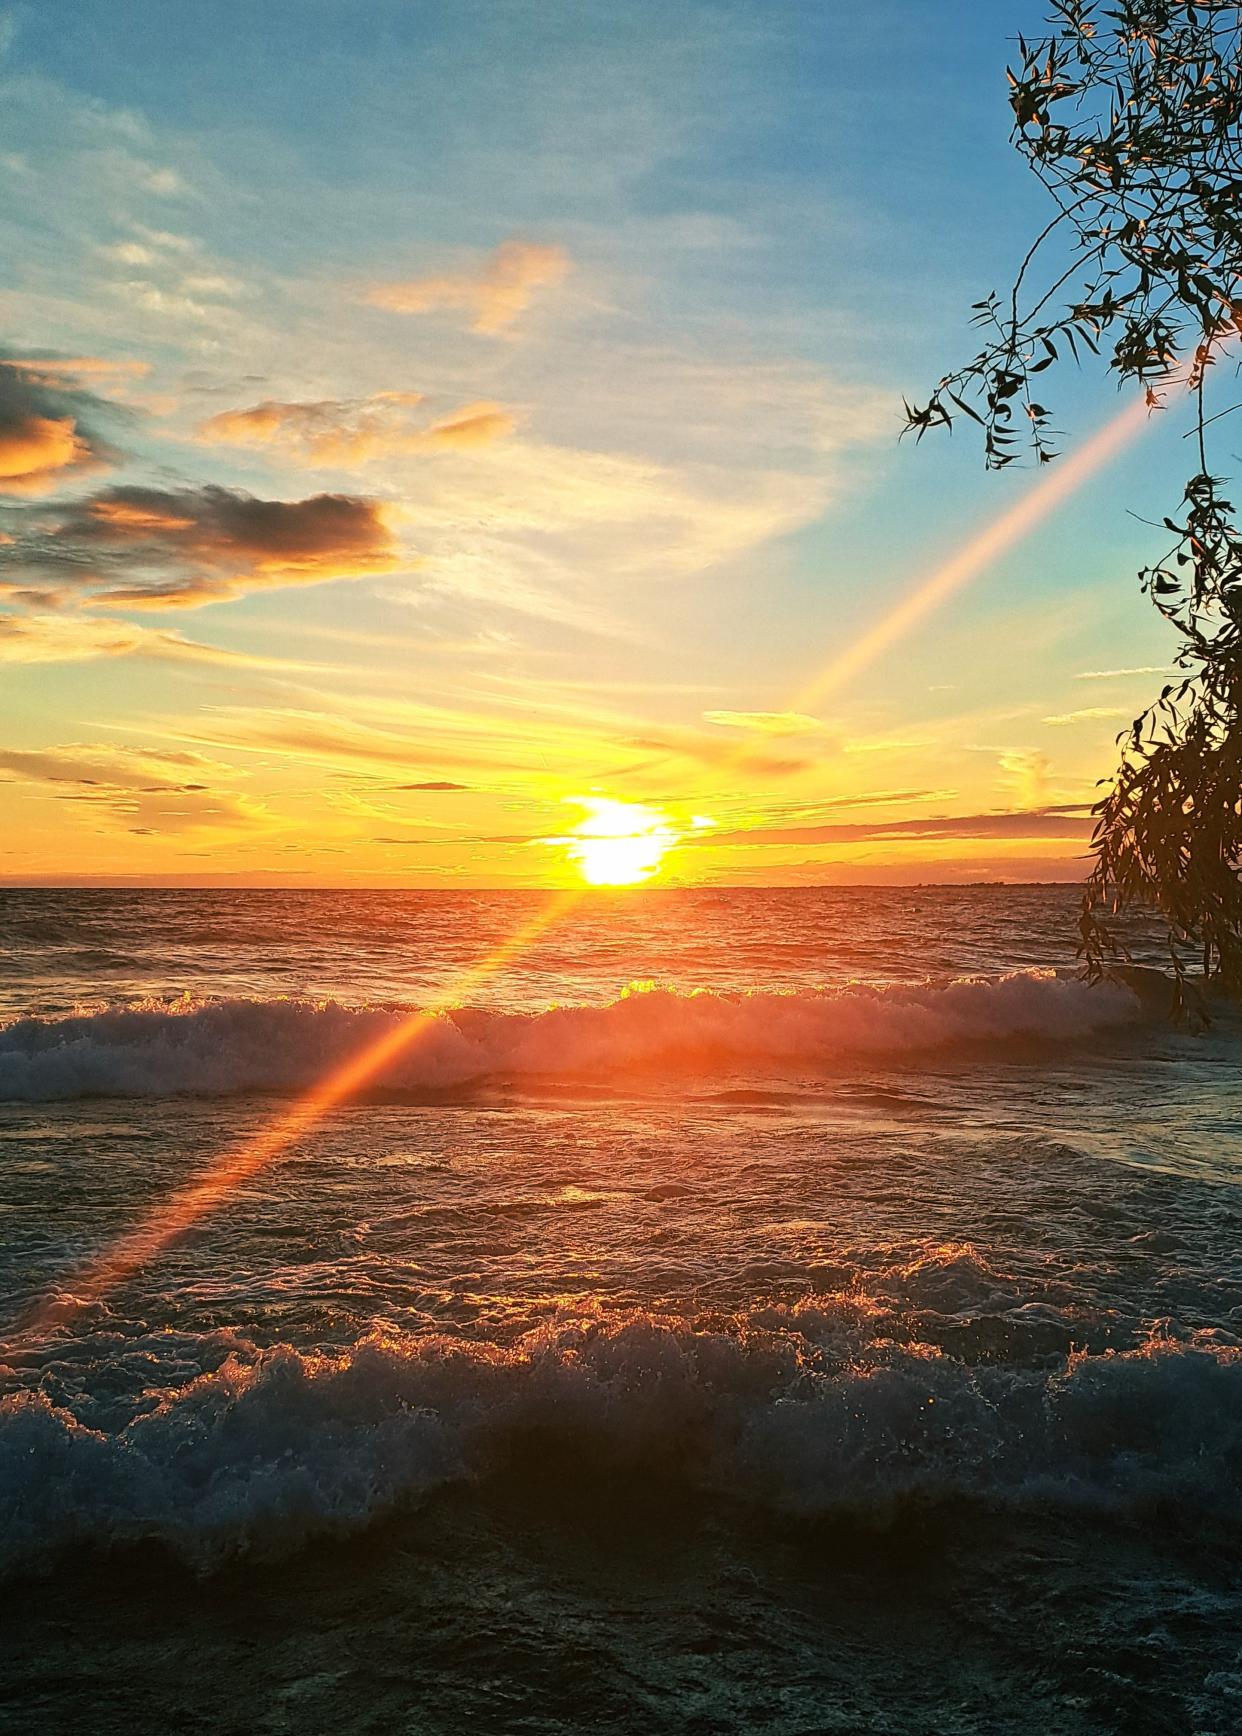 The cover photo for Christine Fisher's book, "God's Glory Manifested," came from a trip to Lake Ontario.